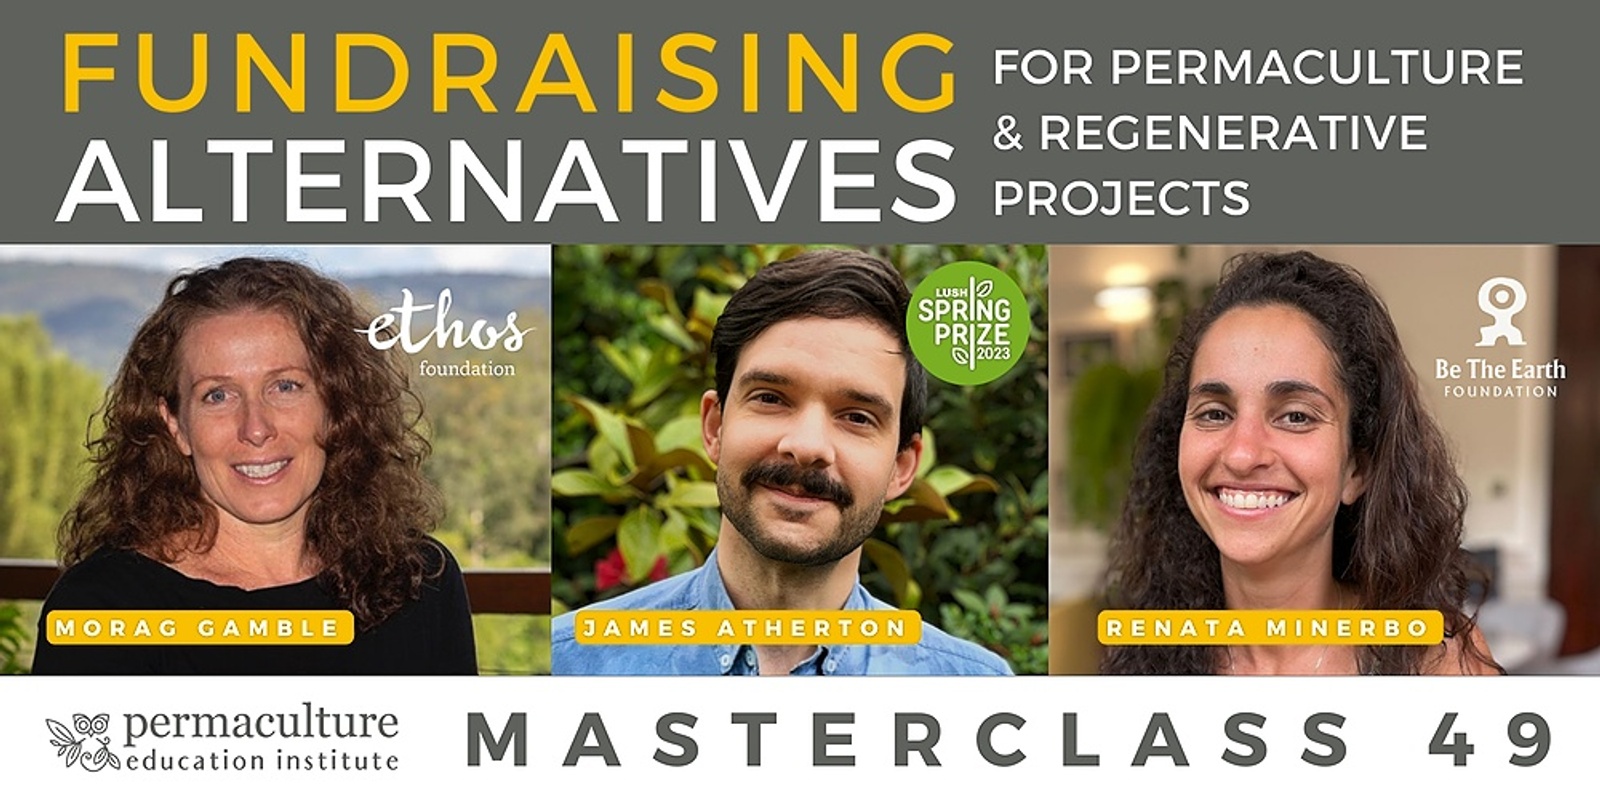 Banner image for MASTERCLASS 49: Fundraising alternatives for permaculture and regenerative projects